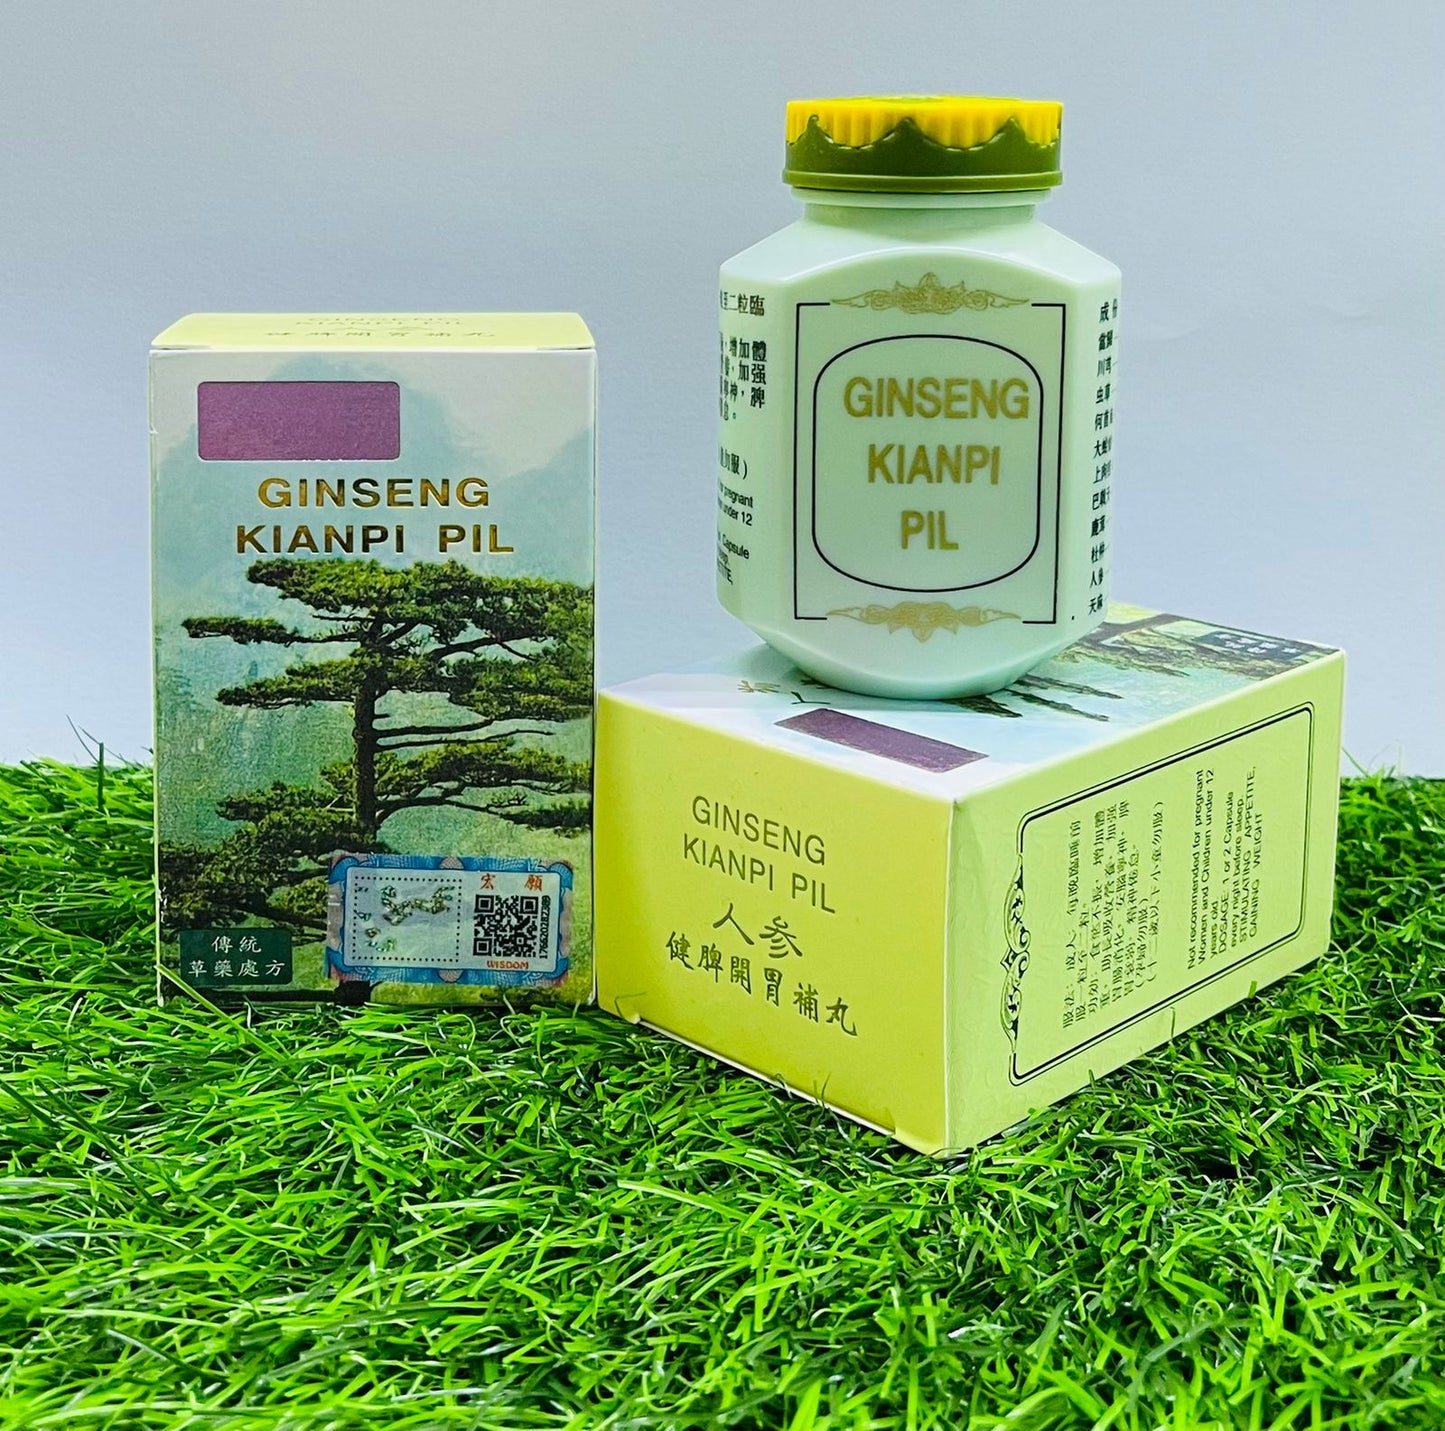 KIANPI GINSENG PIL FOR WEIGHT GAIN, MUSCLES AND STRENGTH